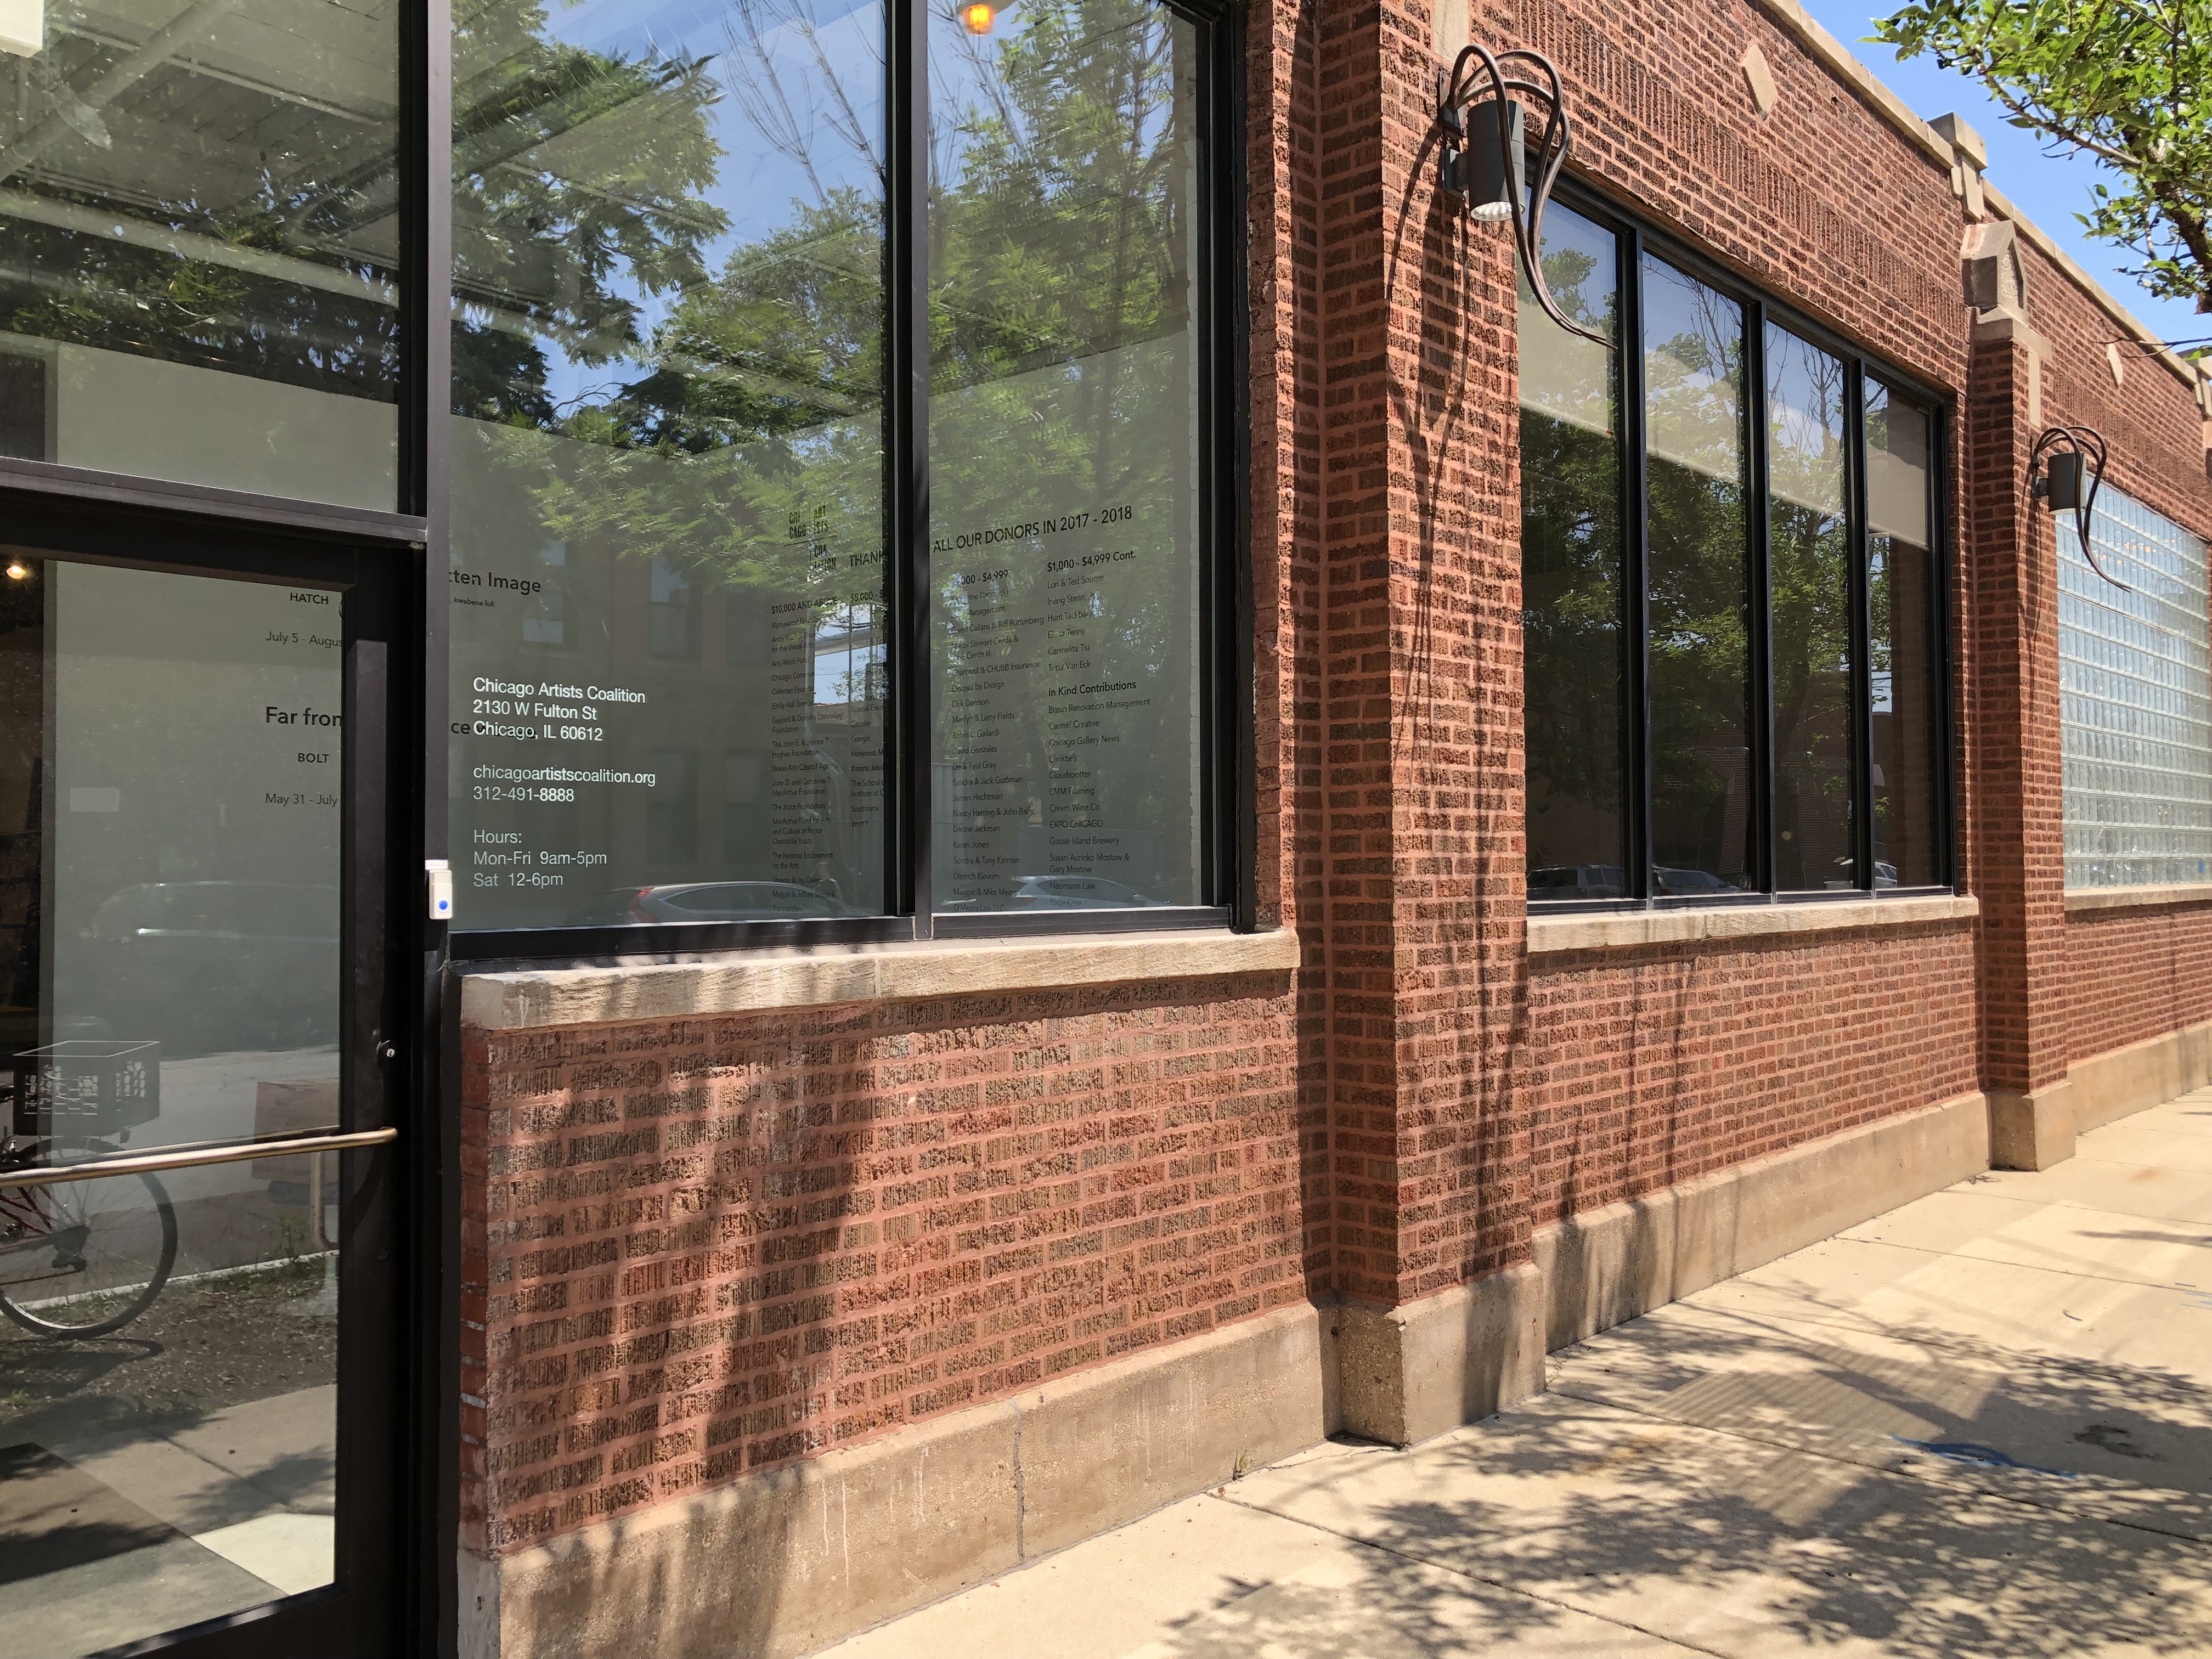 Image: An external shot of Chicago Artists Coalition. The building is made up of red bricks and large, rectangular windows. The entryway of the gallery can be seen through the front door. The sun is shining and the windows reflect the blue sky and leafy green trees that line the sidewalk. Photo courtesy of Chicago Artists Coalition.